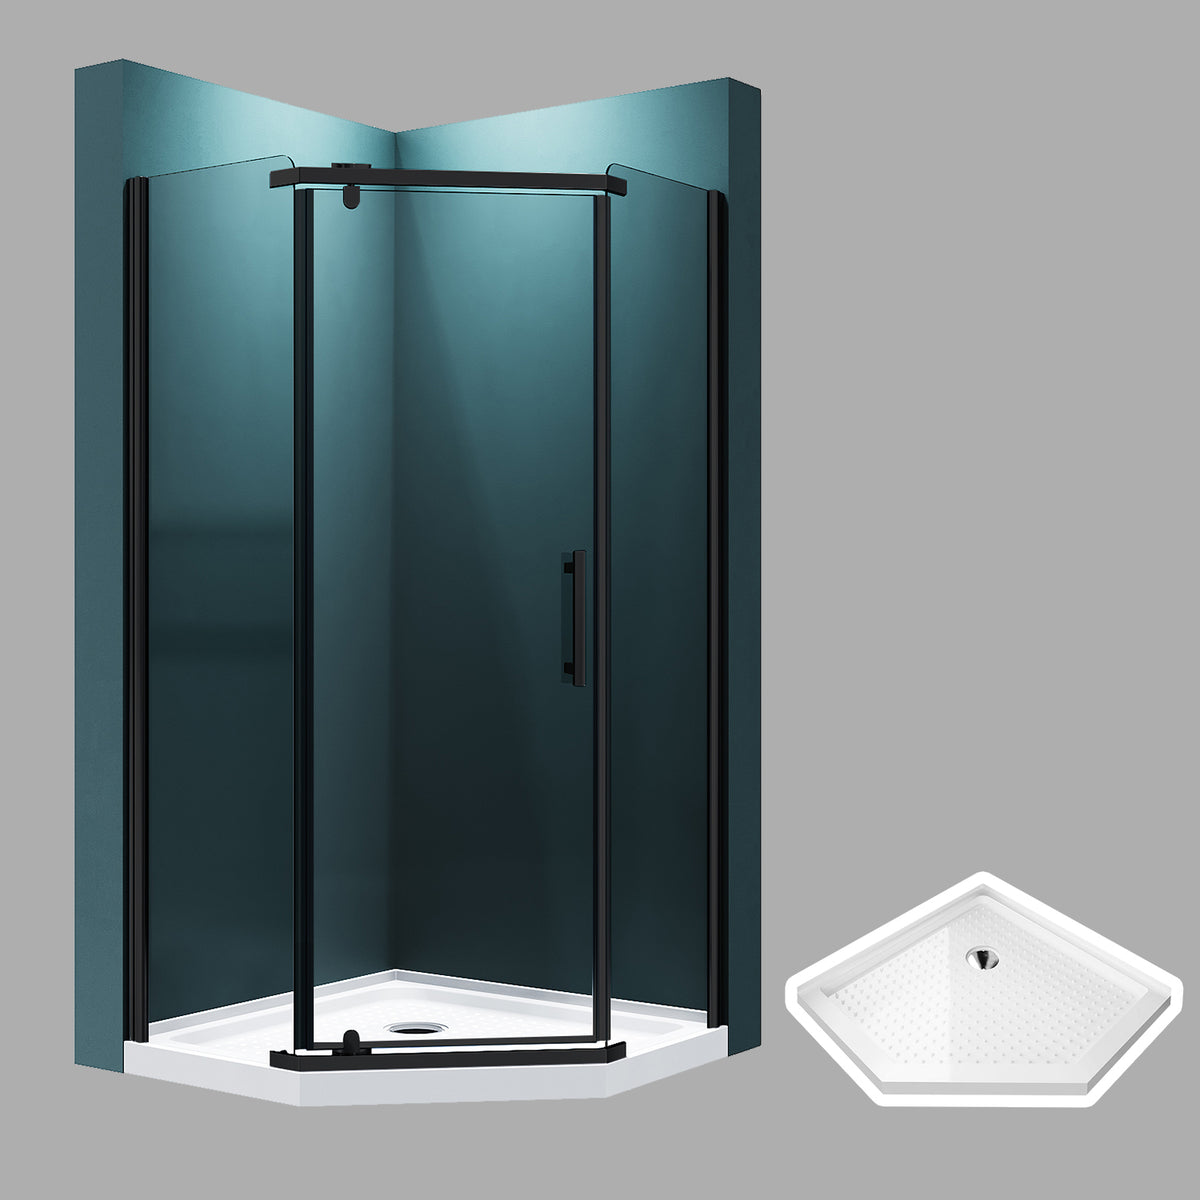 SUNNY SHOWER 36.7 in. W x 36.7 in. D x 71.8 in. H Black Finish Pivot Enclosures With Pivot Door And White Diamond Bases